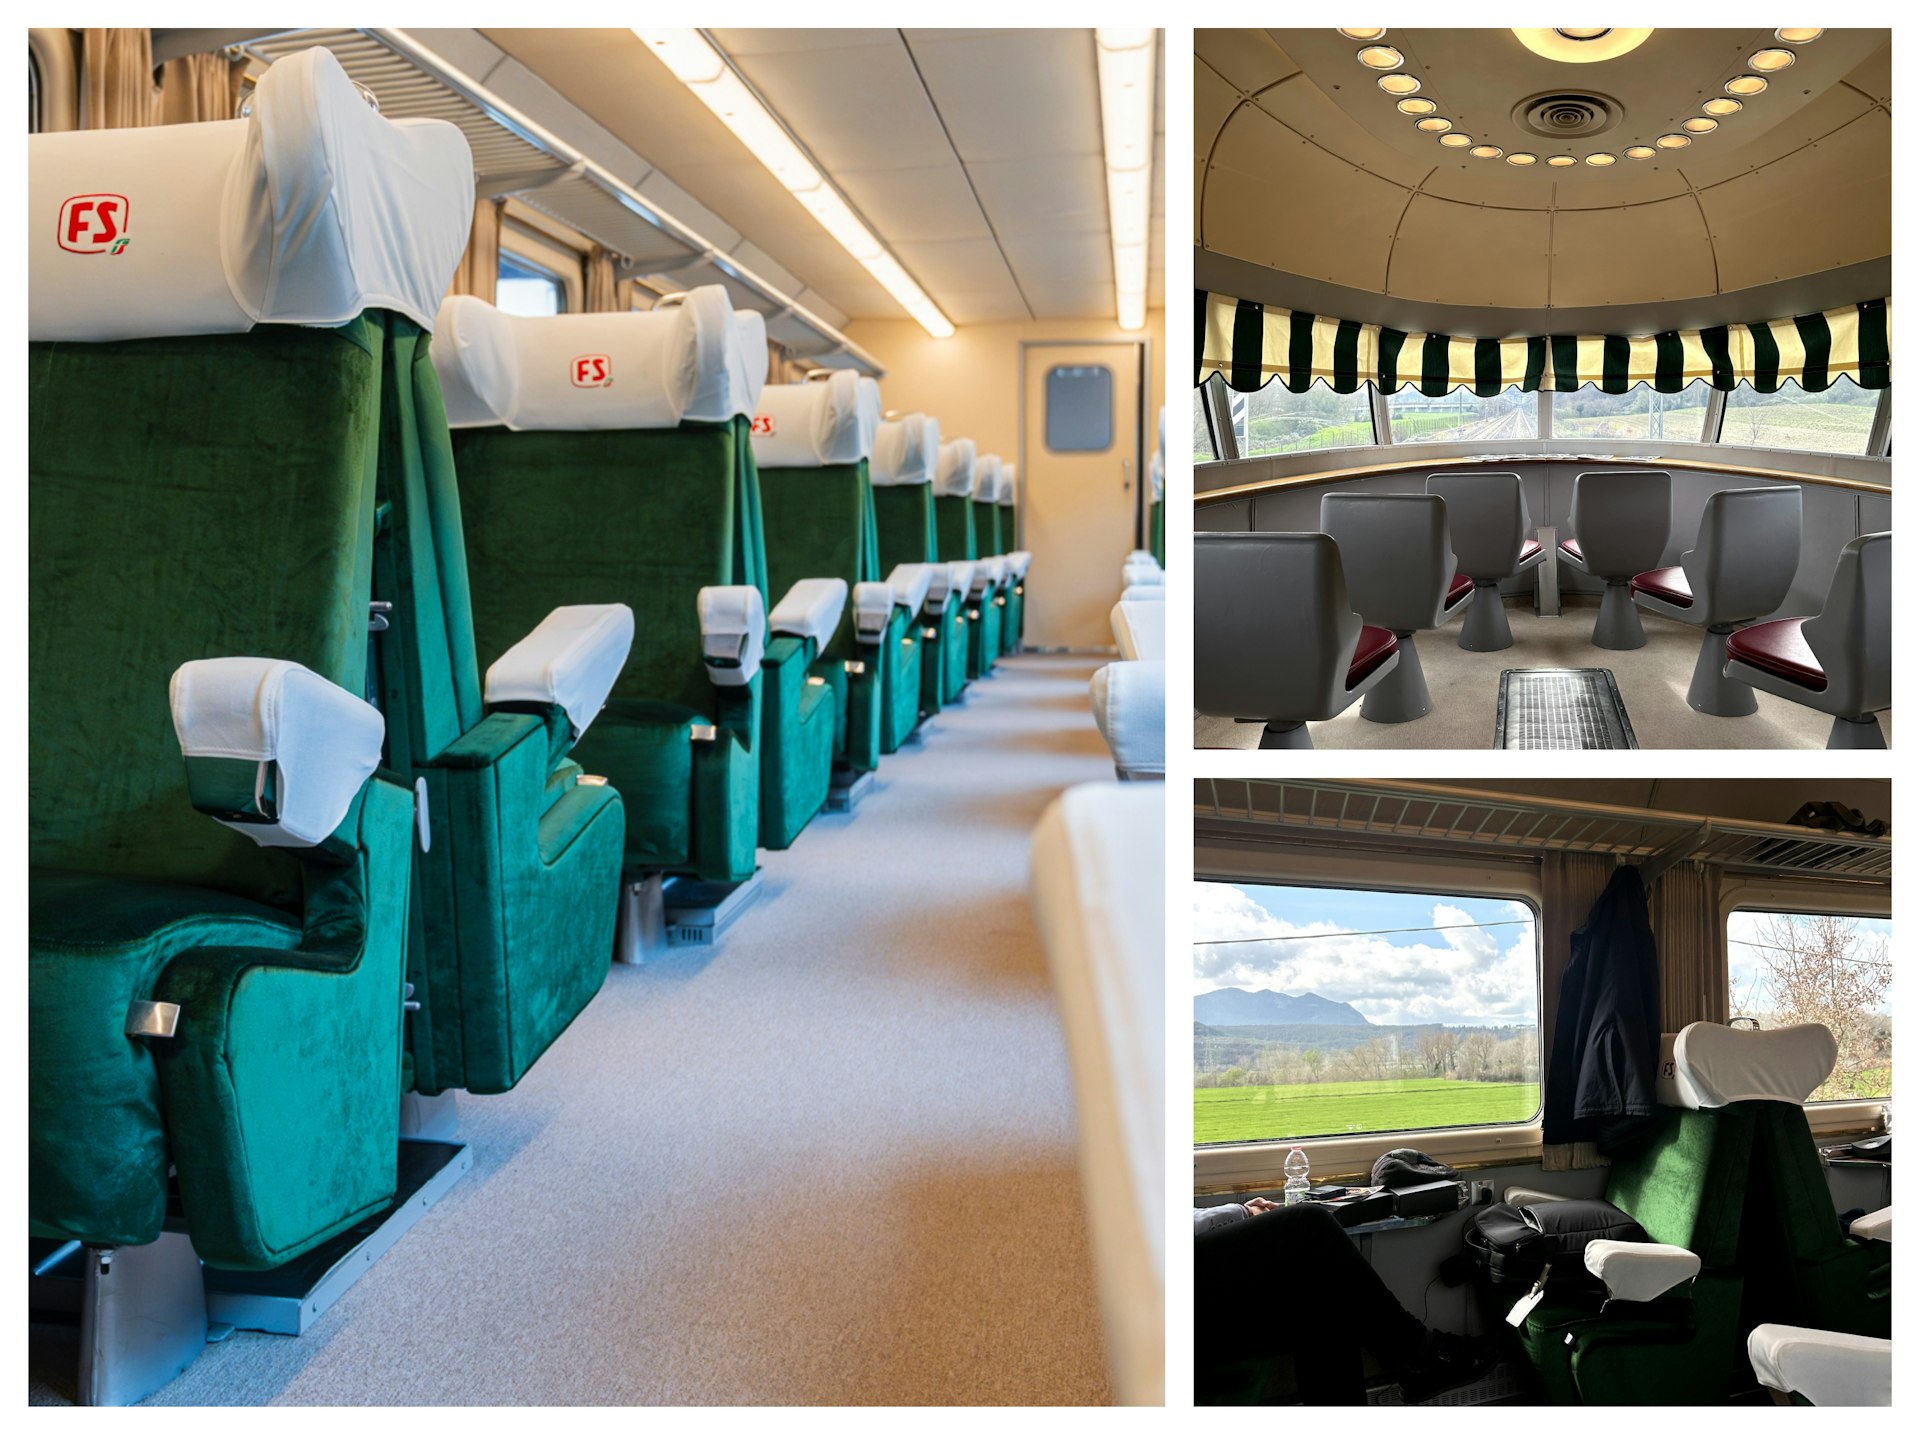 Left: a row of green velvet train seats; Top right: a retro, symmetrical viewing cabin at the rear of the train; Bottom right: a view of the mountains through the train window